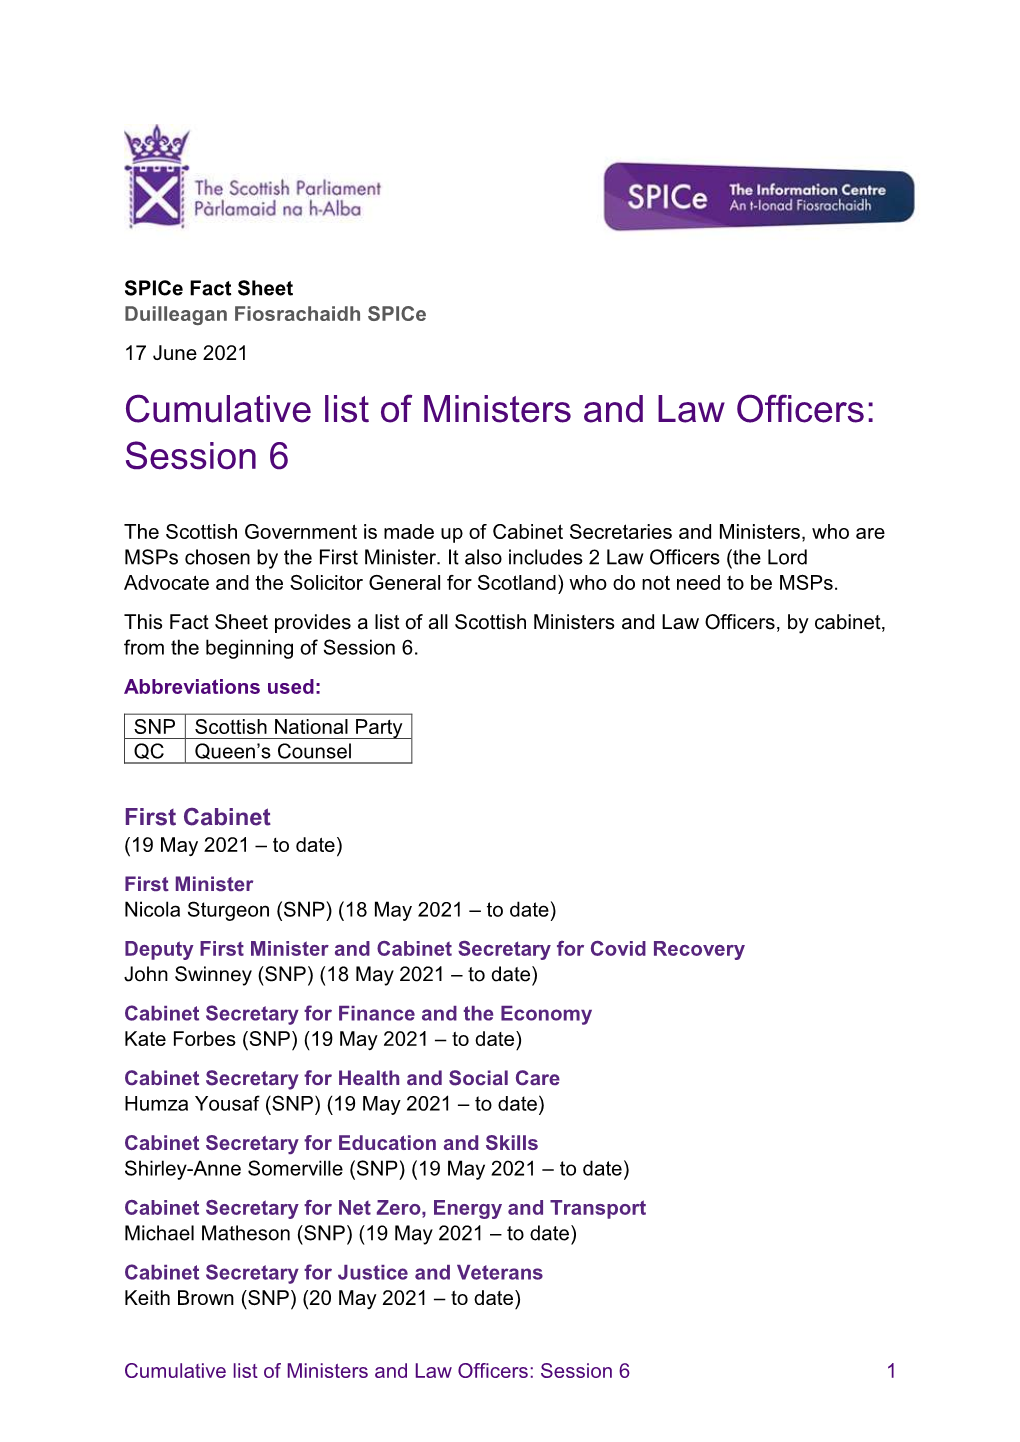 Cumulative List of Ministers and Law Officers: Session 6